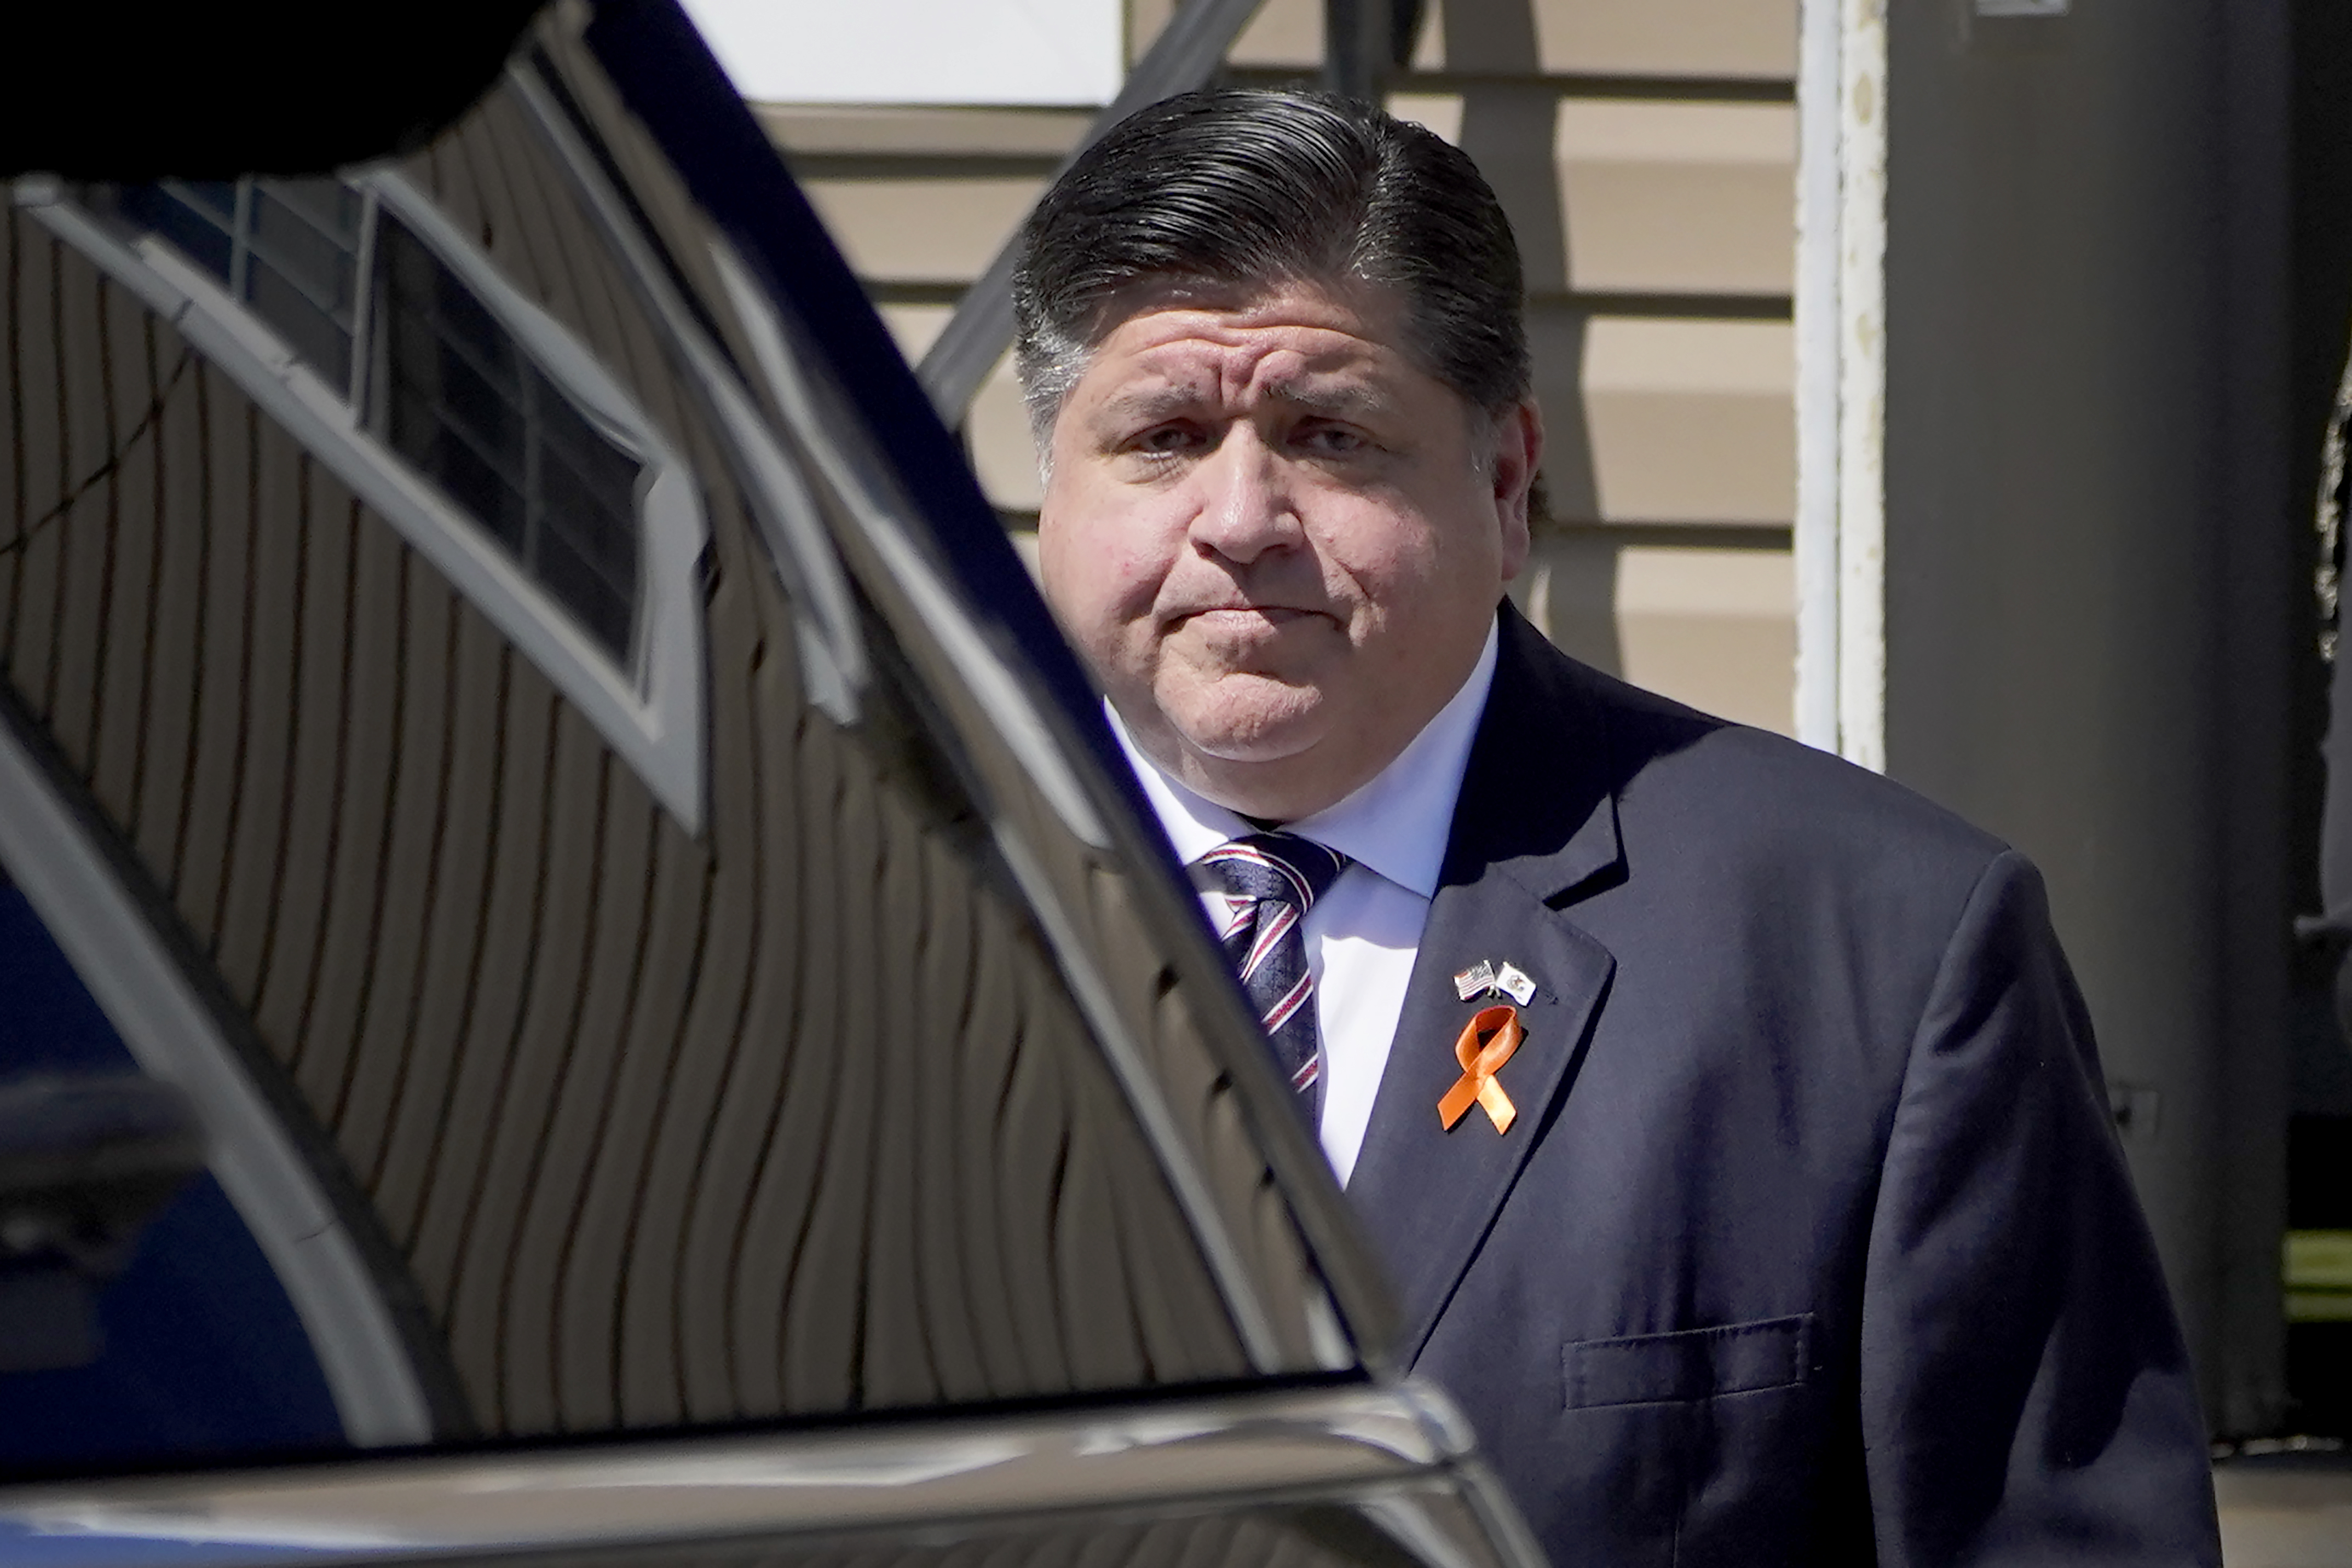 Illinois Gov. J.B. Pritzker departs the Memorial Chapel Funeral Home after visiting the family of Eduardo Uvaldo, who was killed Monday during a mass shooting at the Fourth of July parade in Highland Park, Ill., Saturday, July 9, 2022, in Waukegan, Ill. (AP Photo/Charles Rex Arbogast)